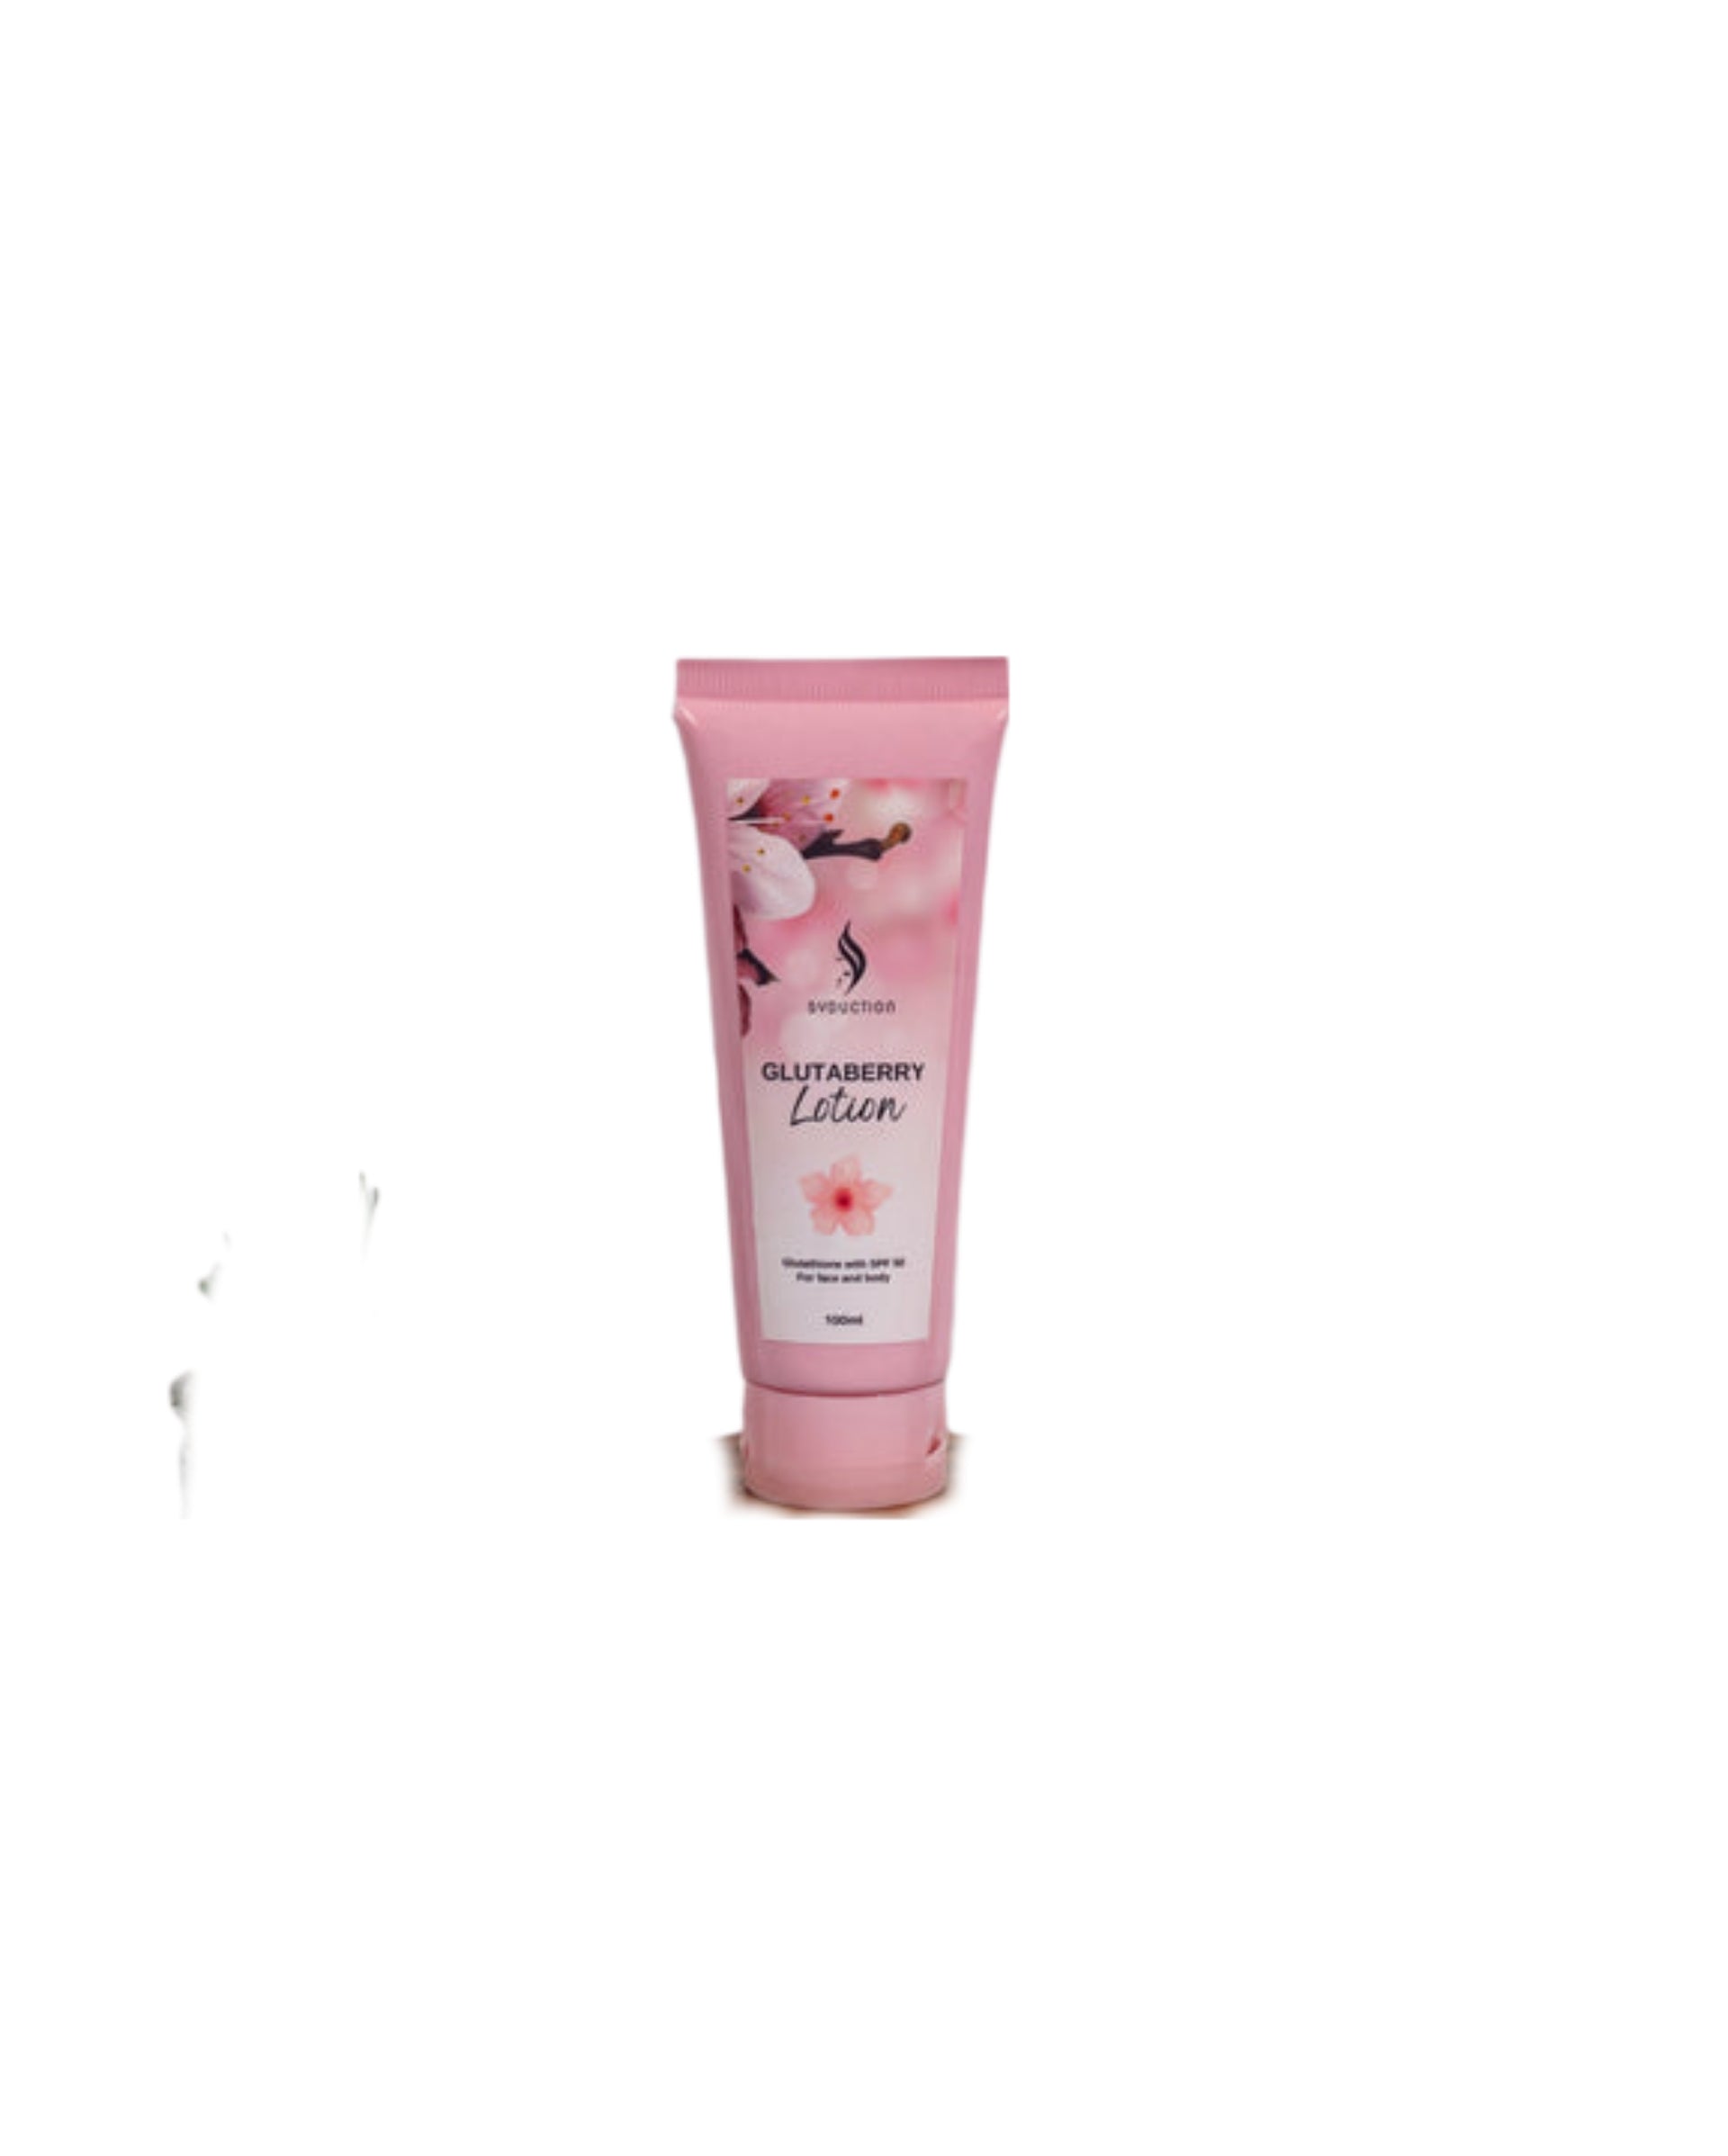 Syduction Glutaberry Lotion